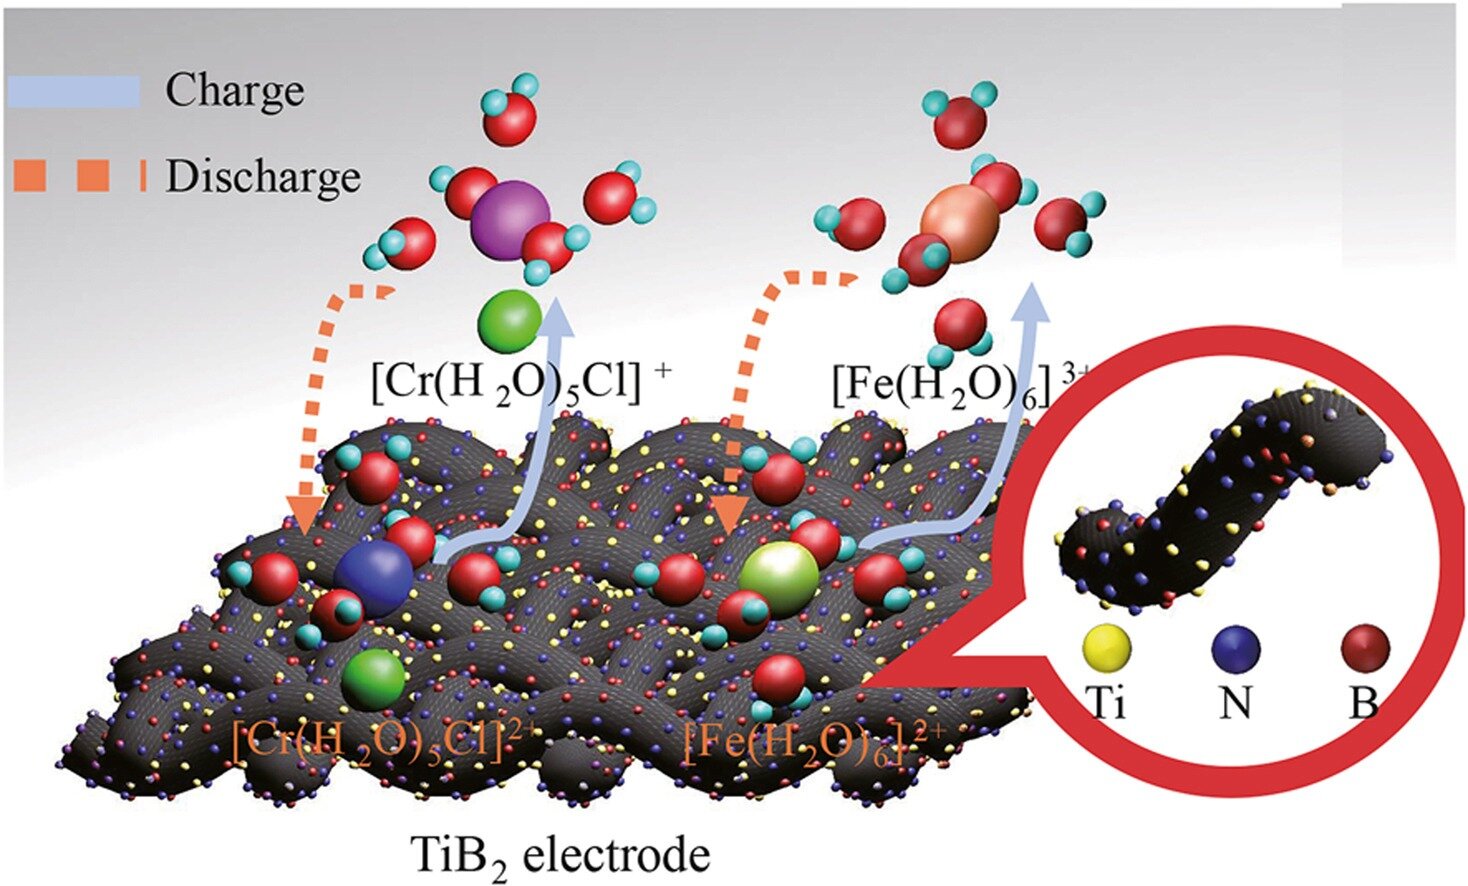 #Iron-chromium redox flow batteries enhanced with N-B doped electrodes